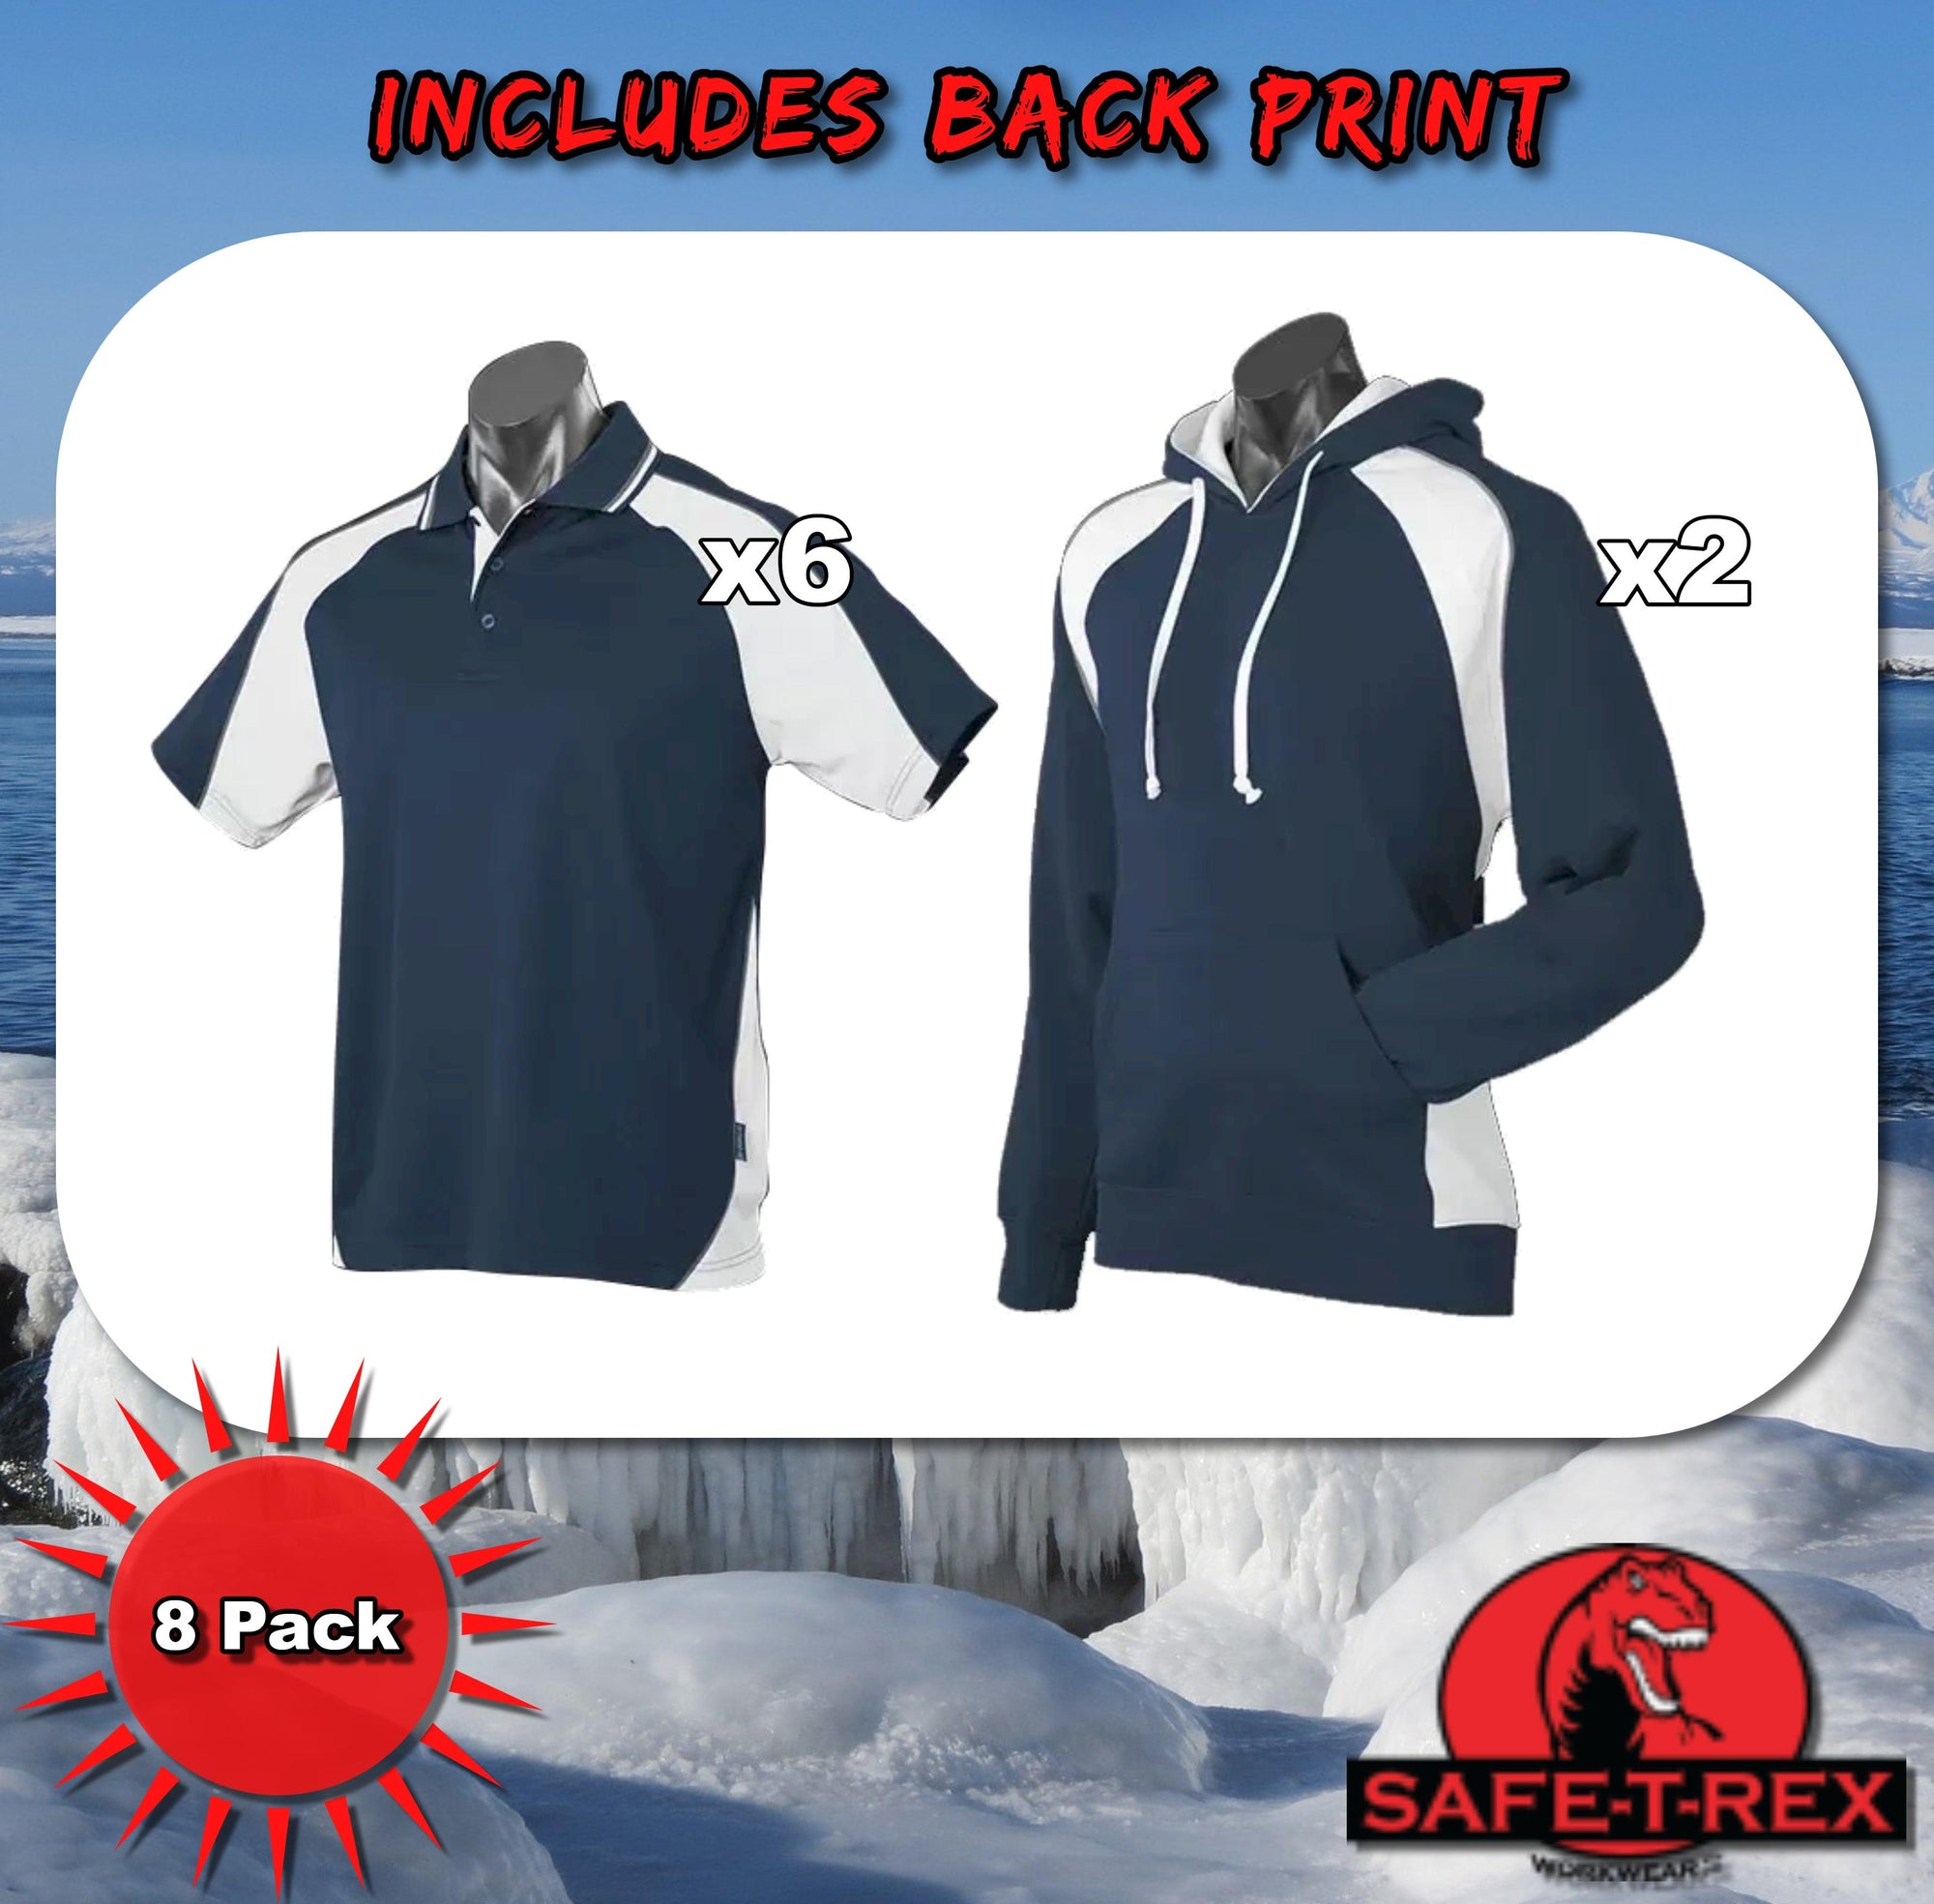 Panorama Contrast 8 Pack Polos & Hoodies With Vinyl Print On Back - Safe-T-Rex Workwear Pty Ltd